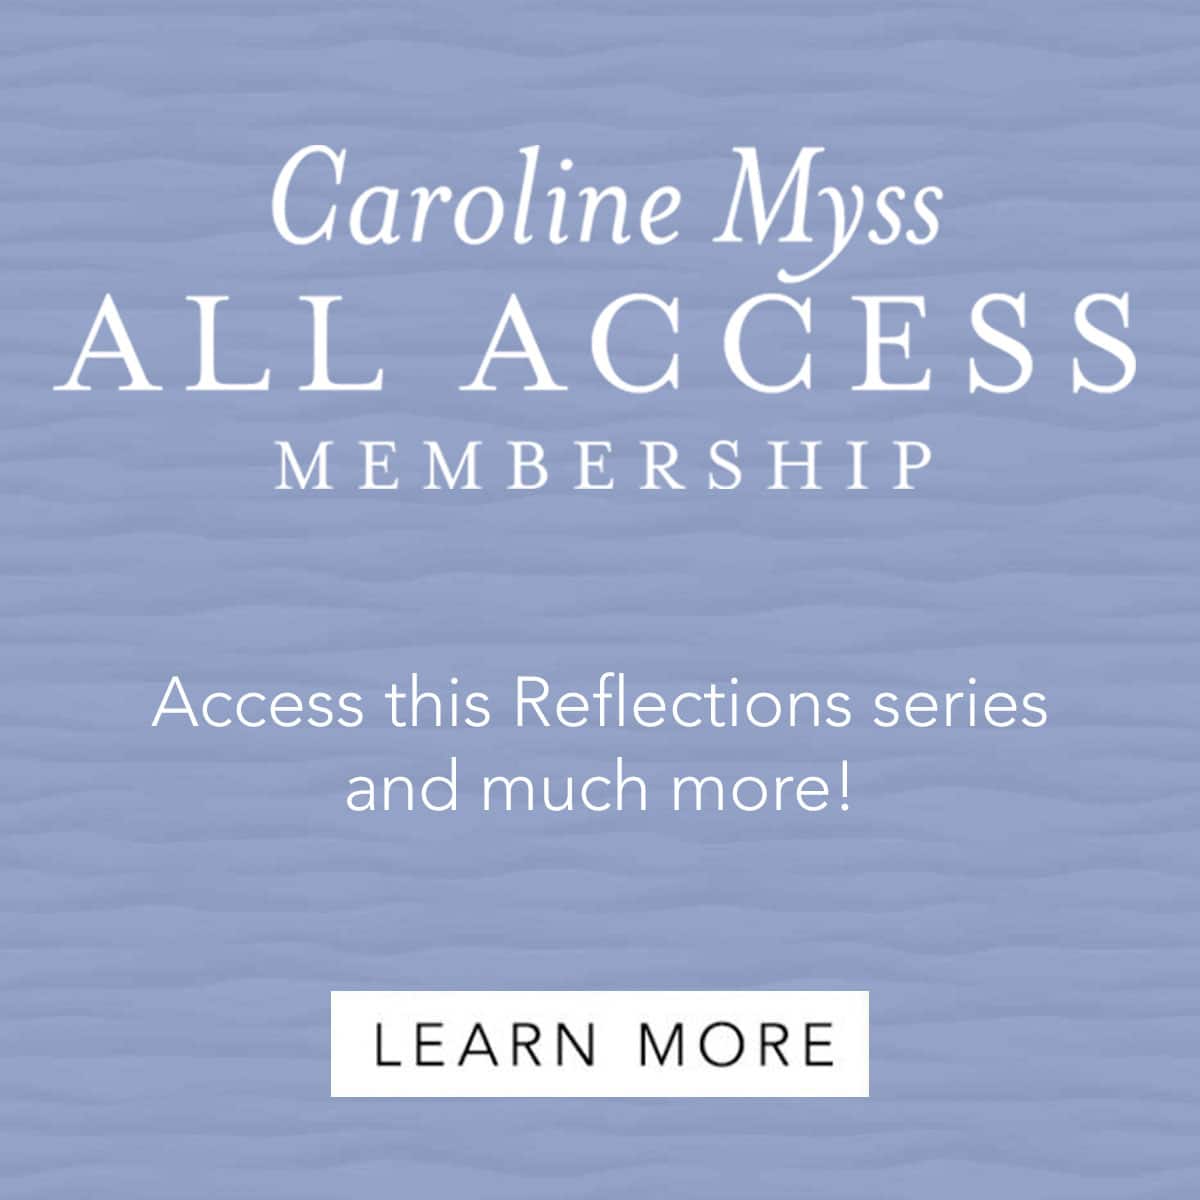 Caroline Myss All Access - Access this Reflections class and much more!